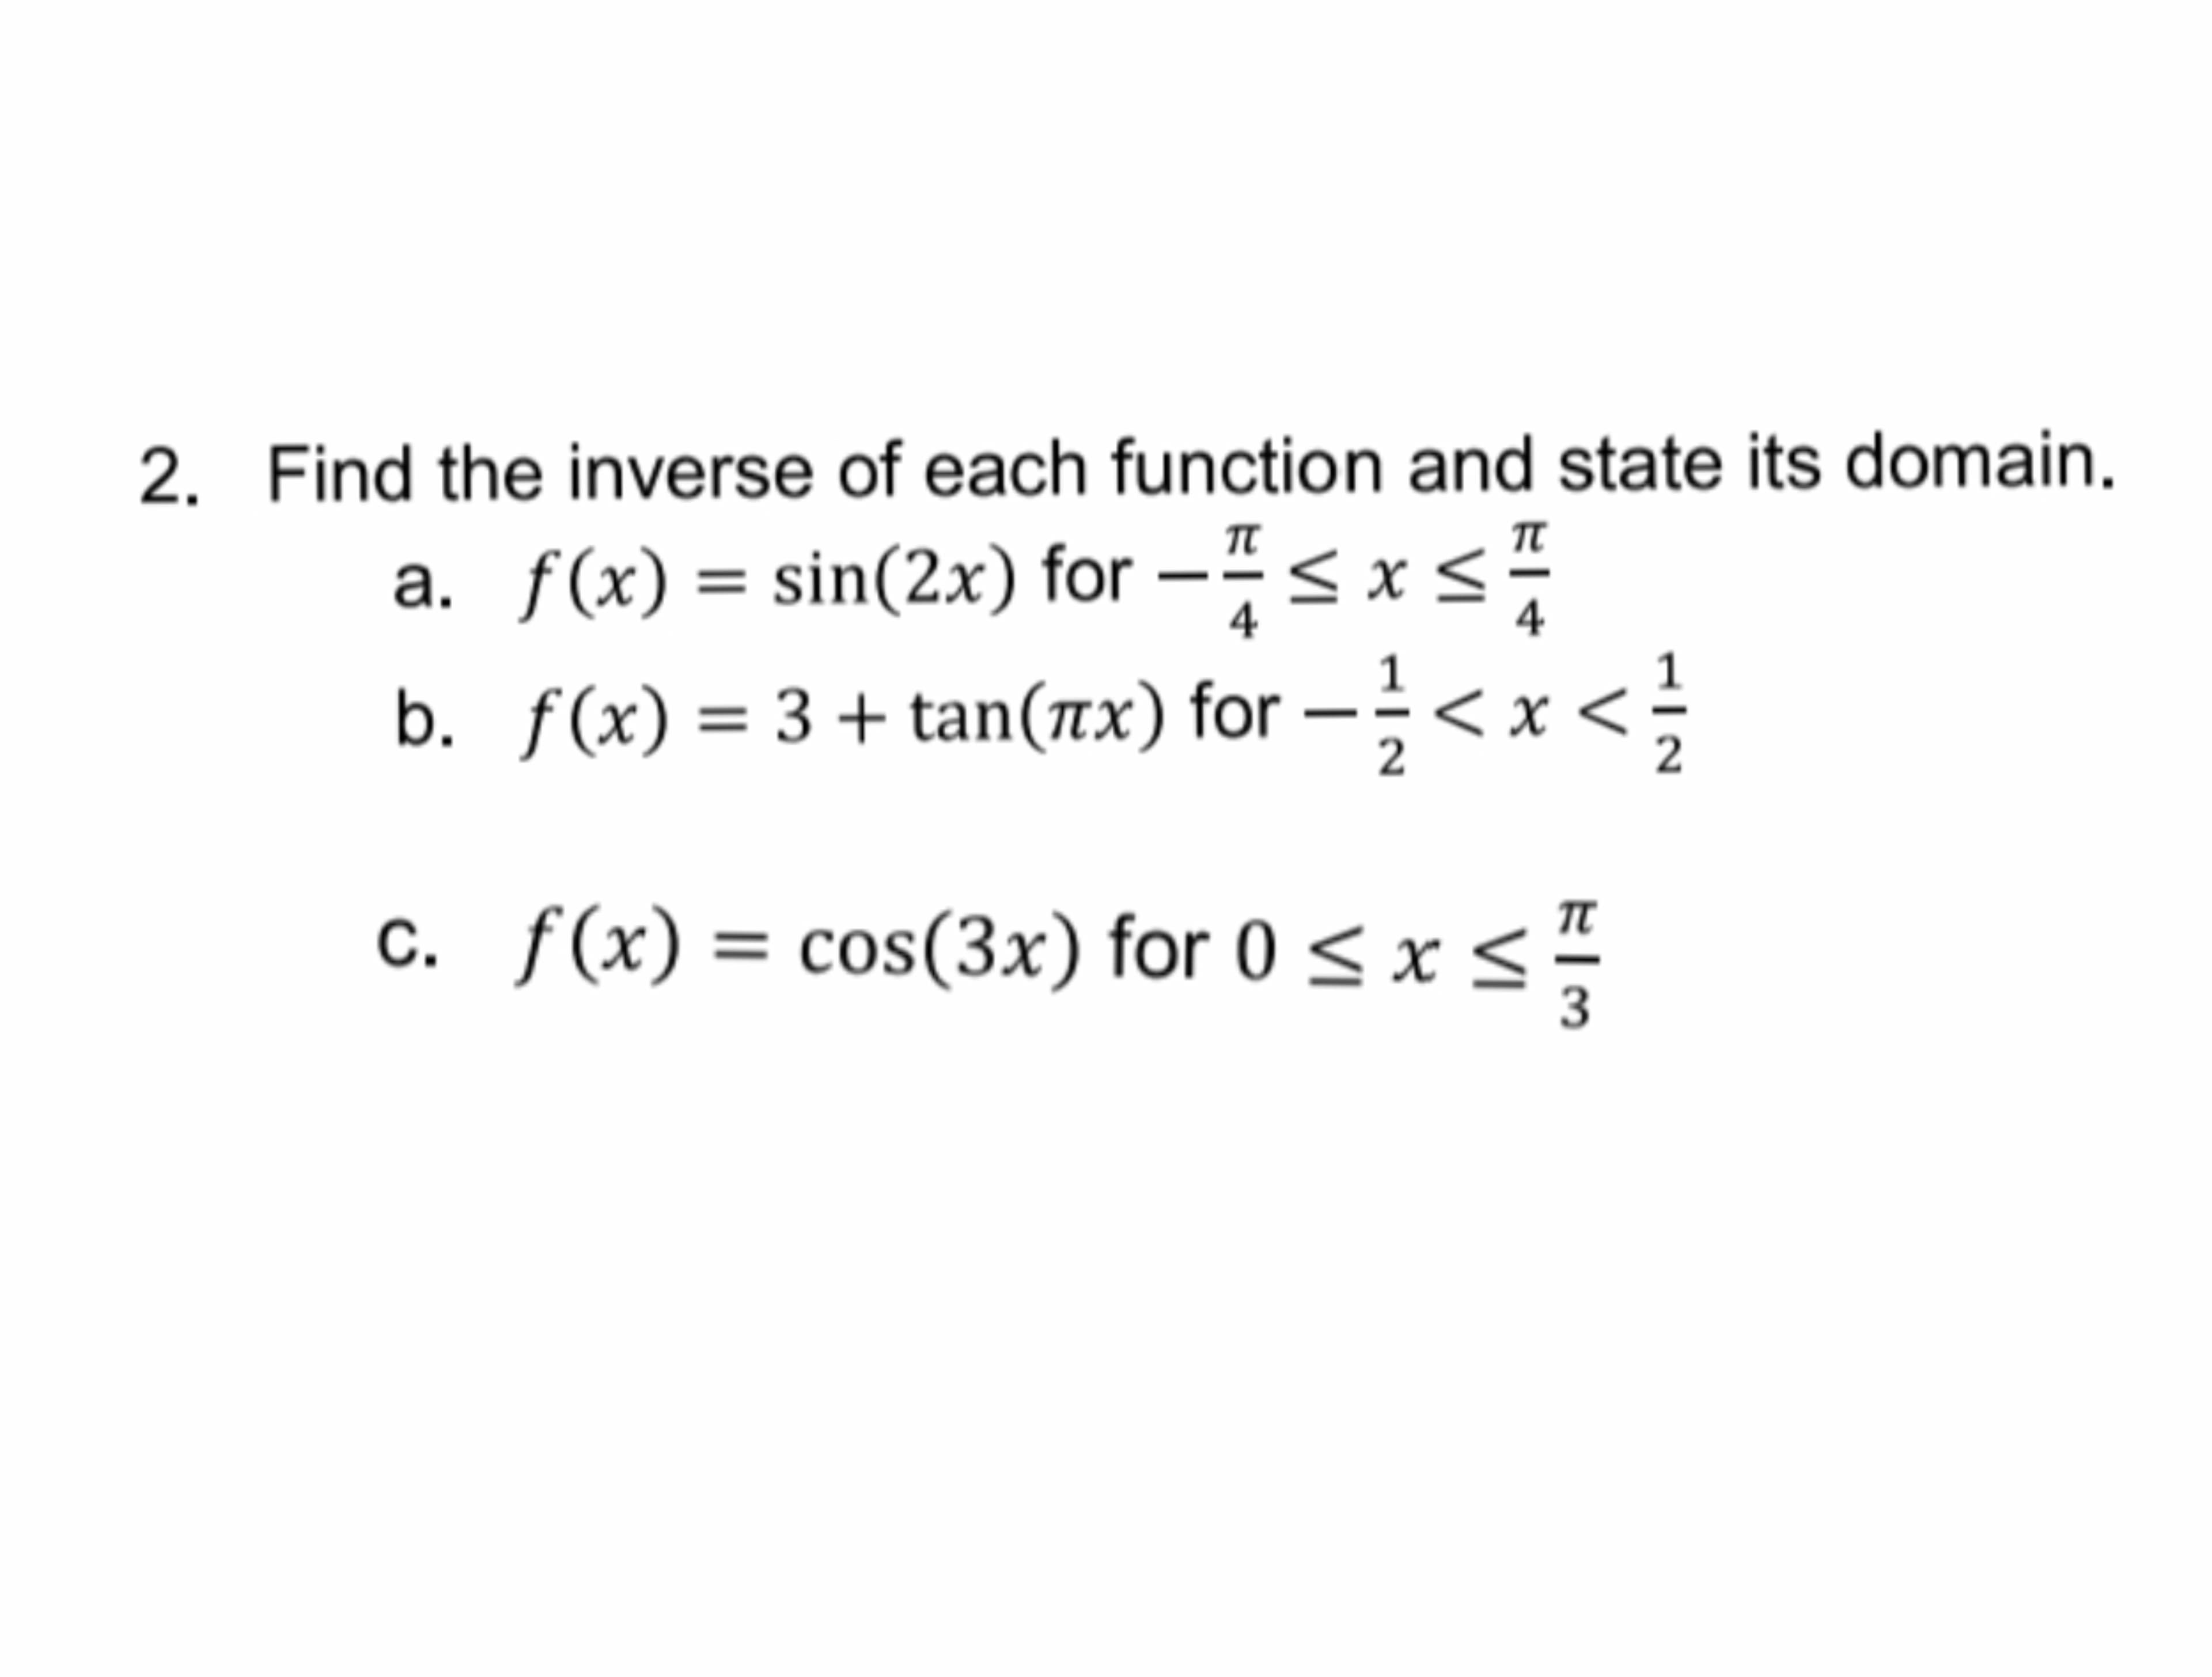 Find the inverse of each function and state its domain.
π
π
a. f(x) = sin(2x) for -< x <
4
4
b. f(x) = 3 + tan(rx) for –<x <
2
С.
c. f(x) = cos(3x) for 0 < x <-
%3D
3
V
